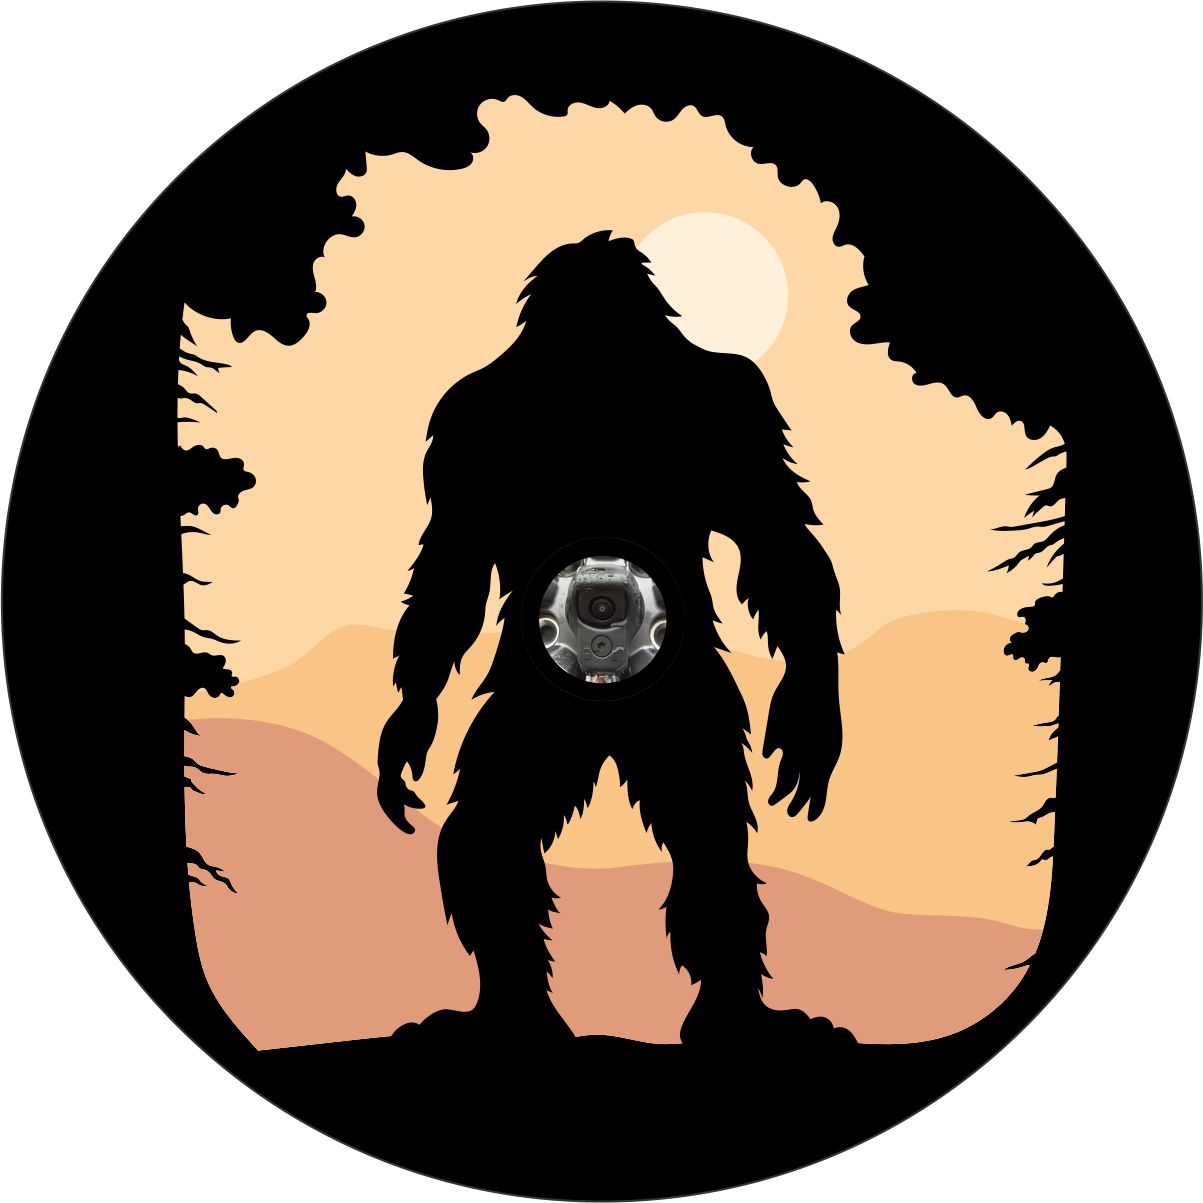 Scary silhouette of bigfoot sasquatch standing in a cave looking over the mountains with a hole for a back up camera.